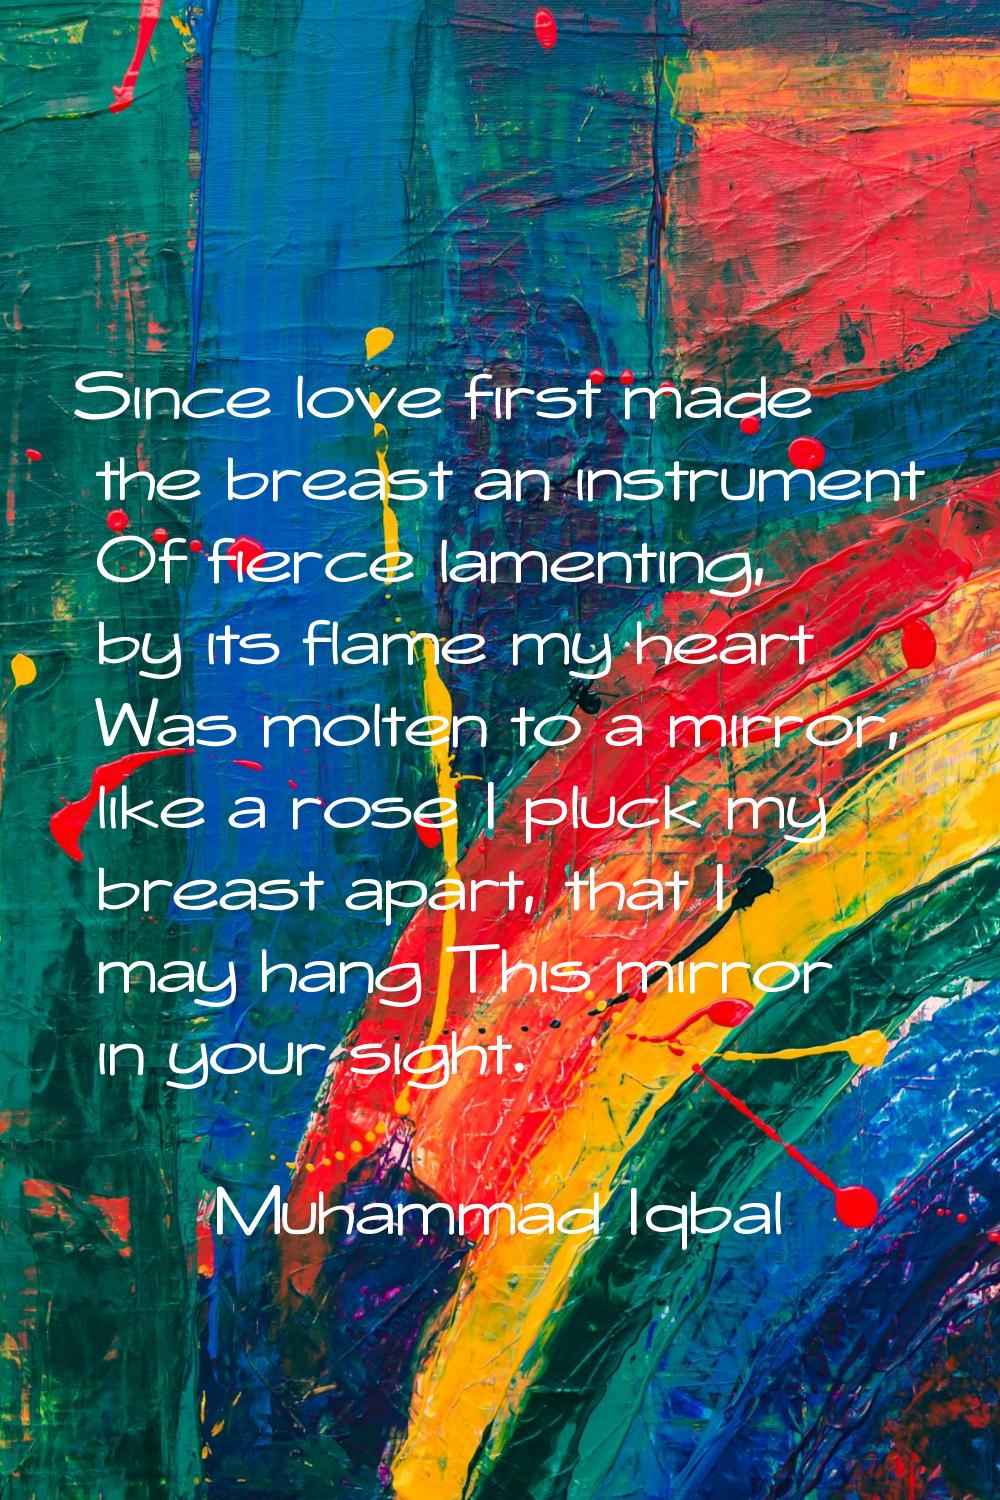 Since love first made the breast an instrument Of fierce lamenting, by its flame my heart Was molte